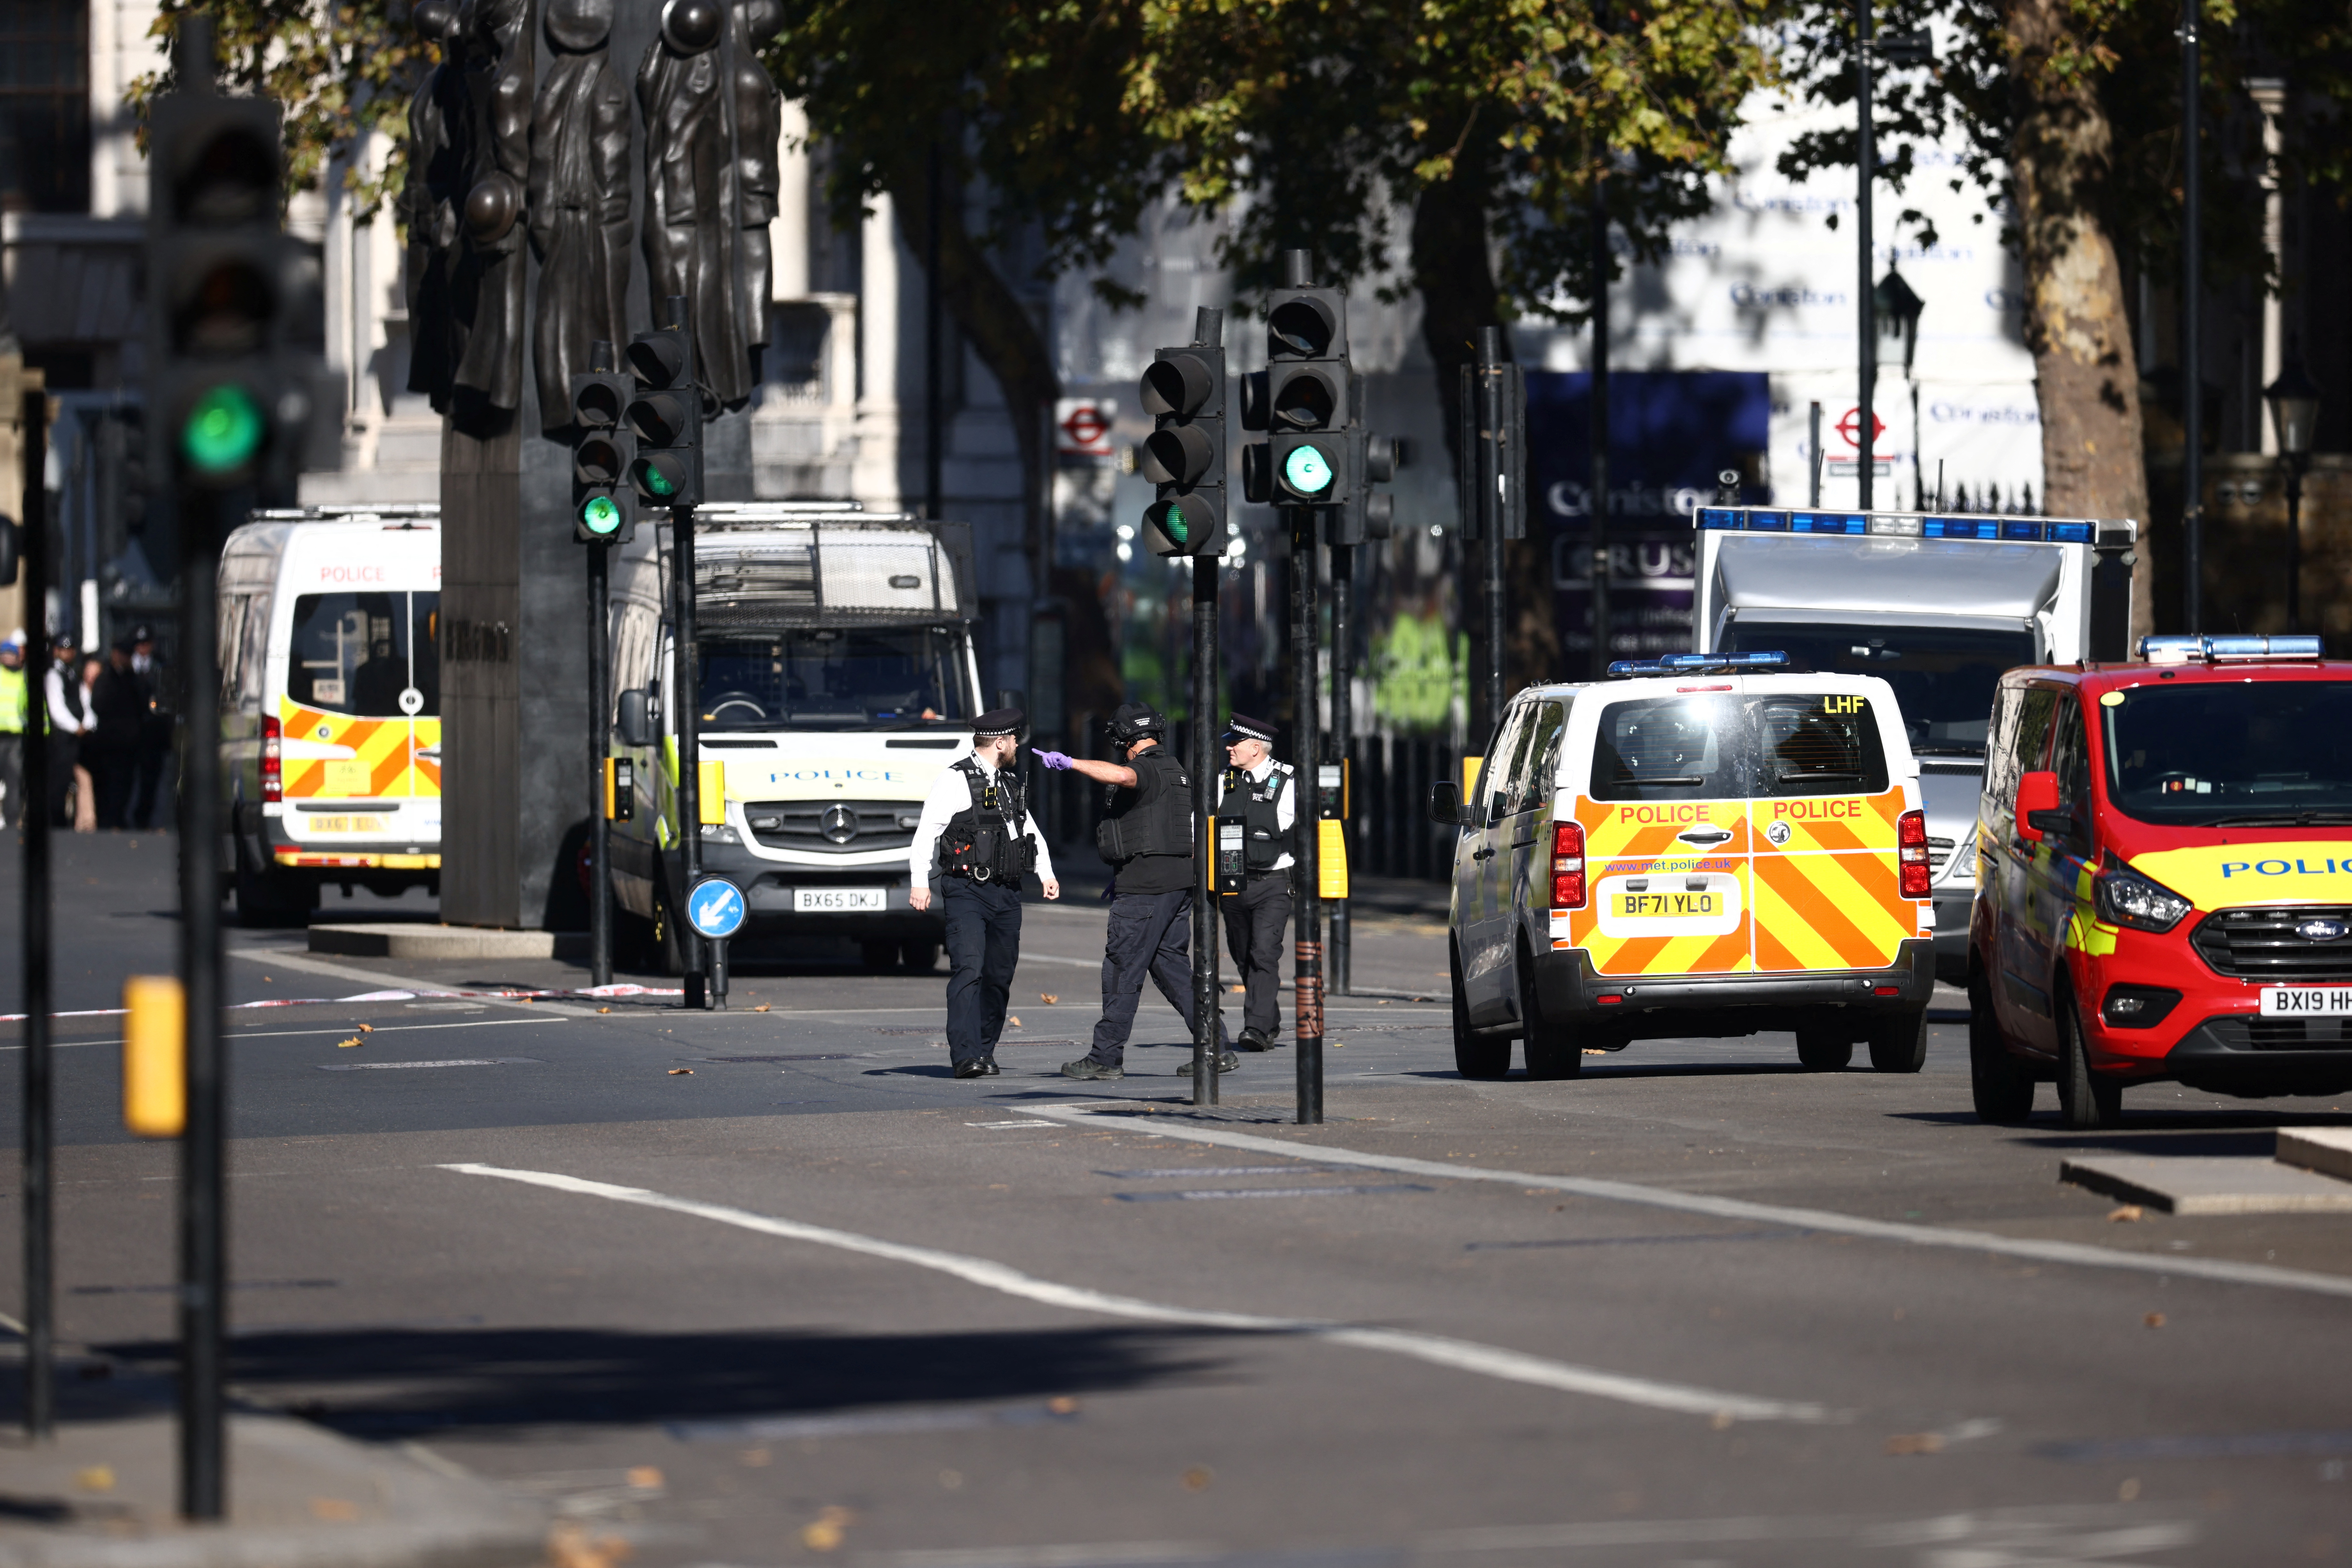 Members of the police work after a suspicious package was found, at Whitehall